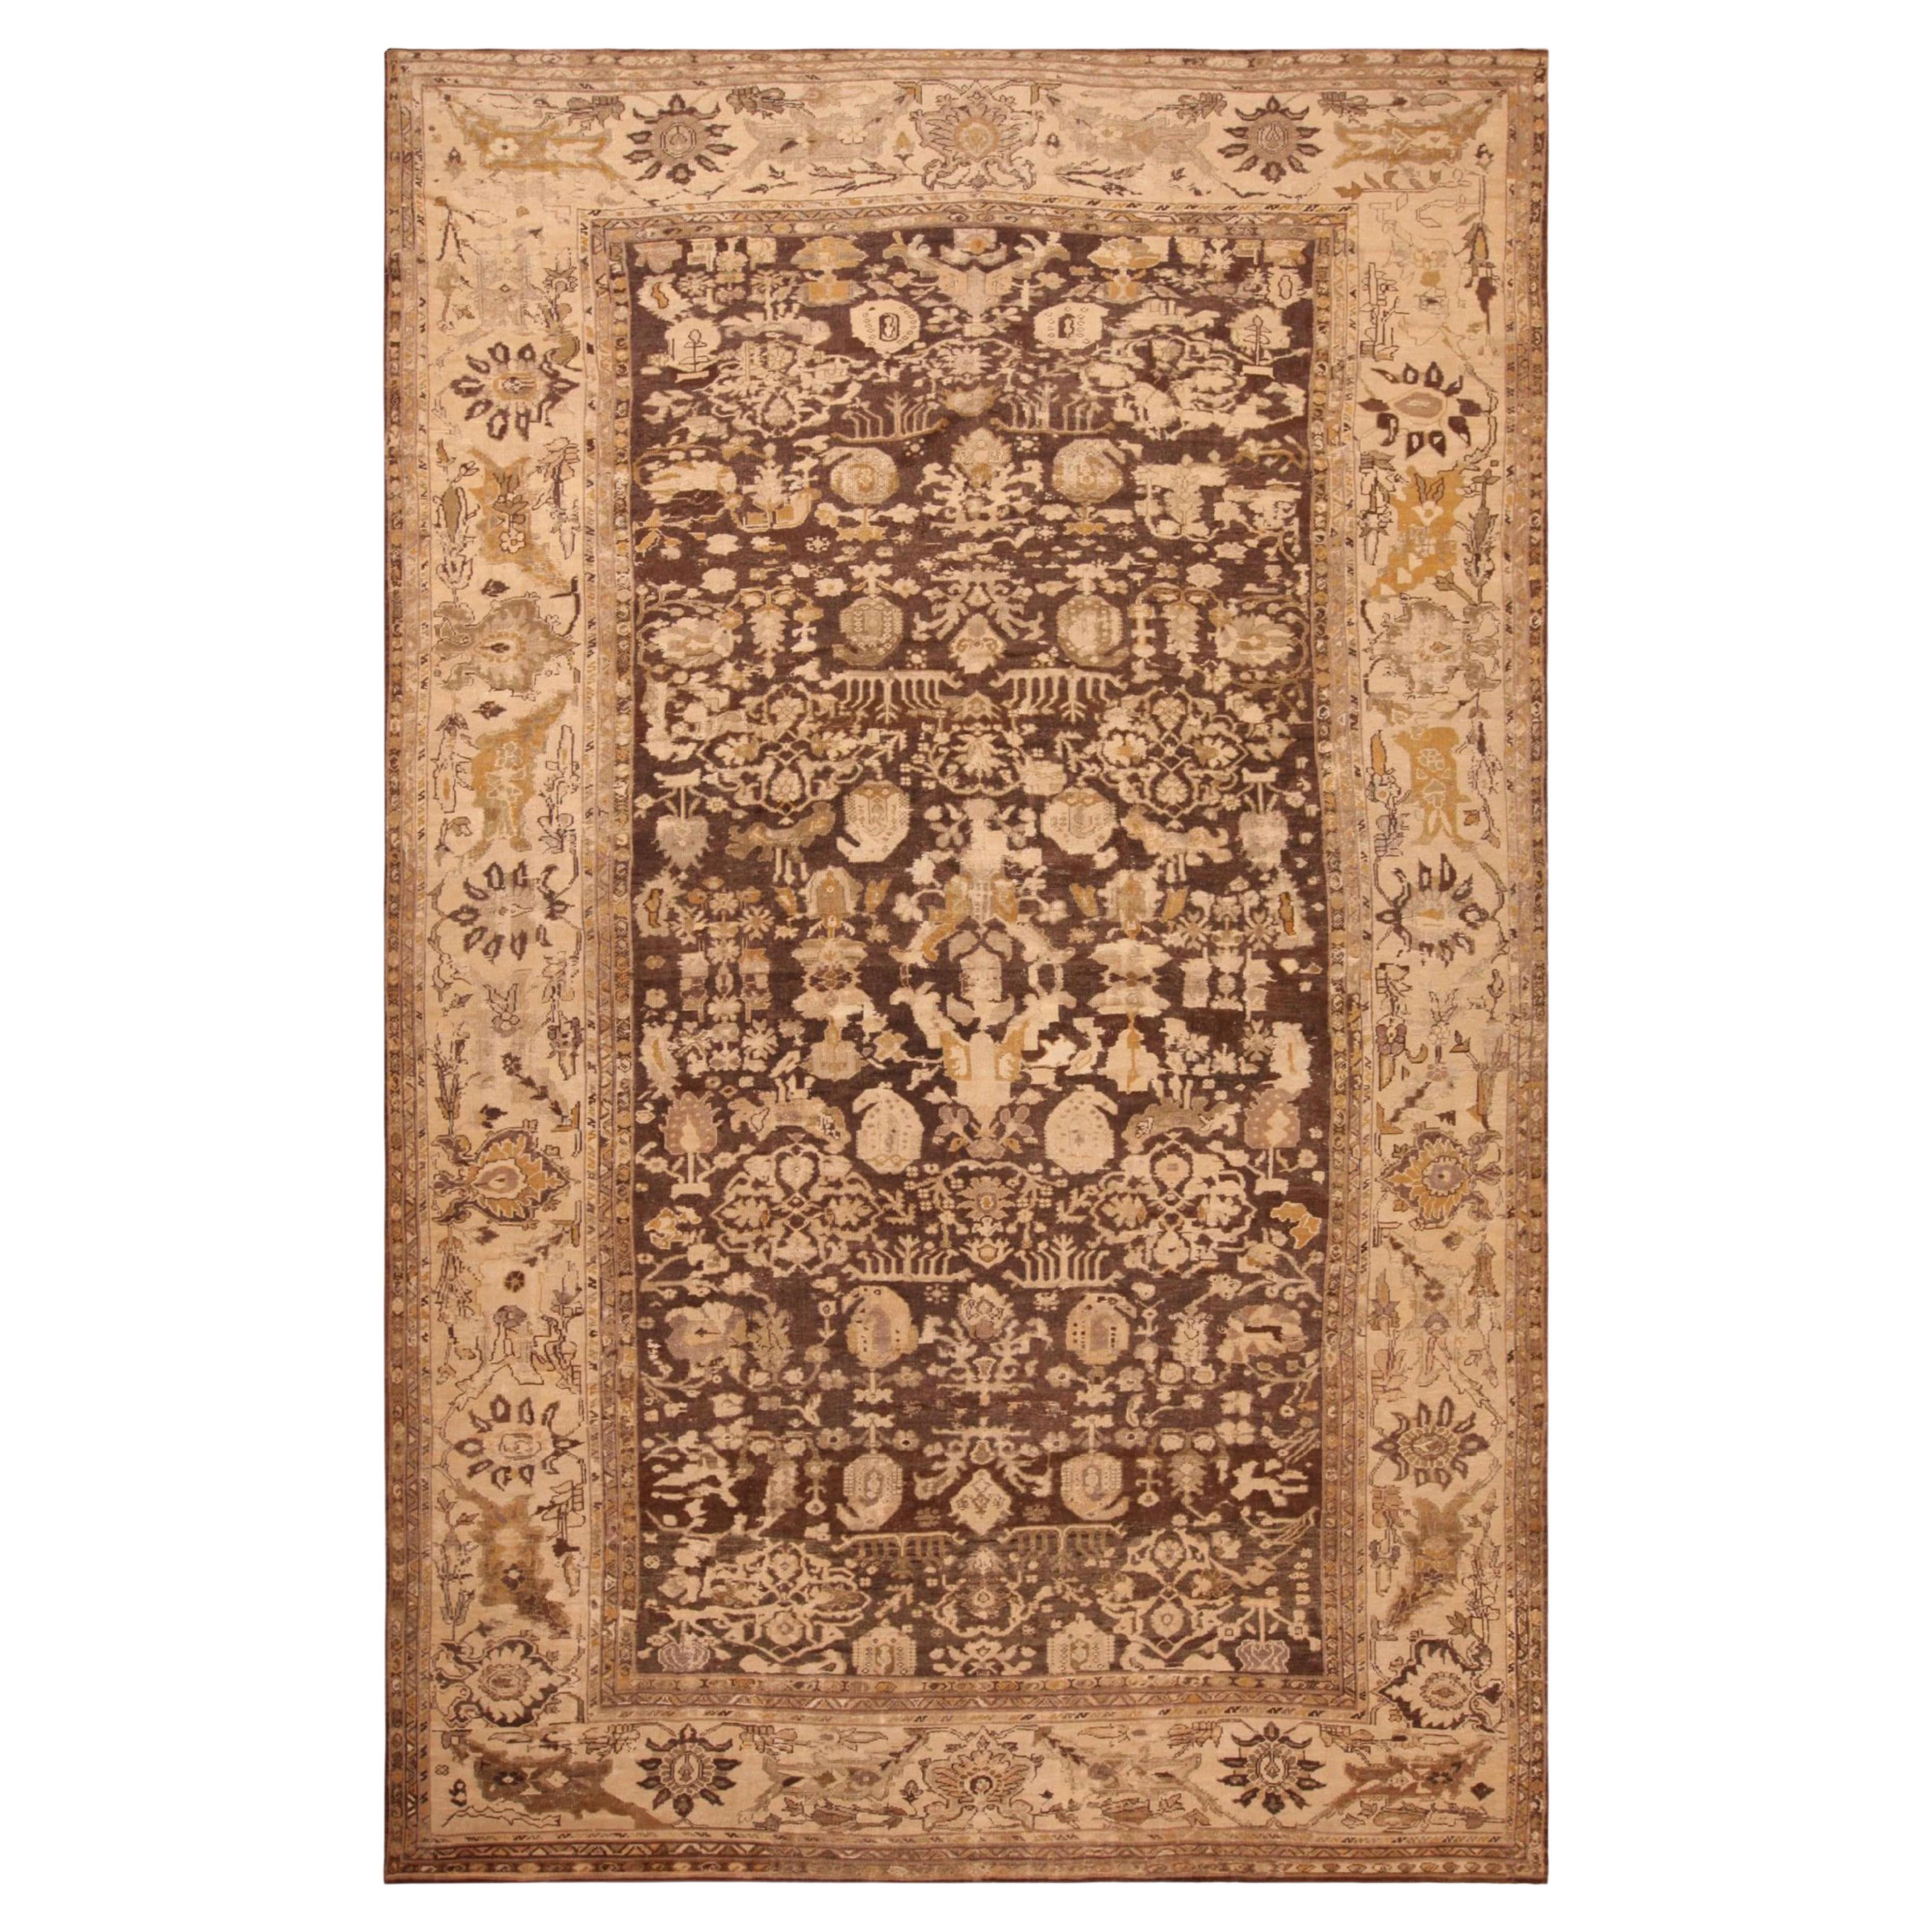 Antique Persian Sultanabad Rug. Size: 10 ft 1in x 16 ft 5 in